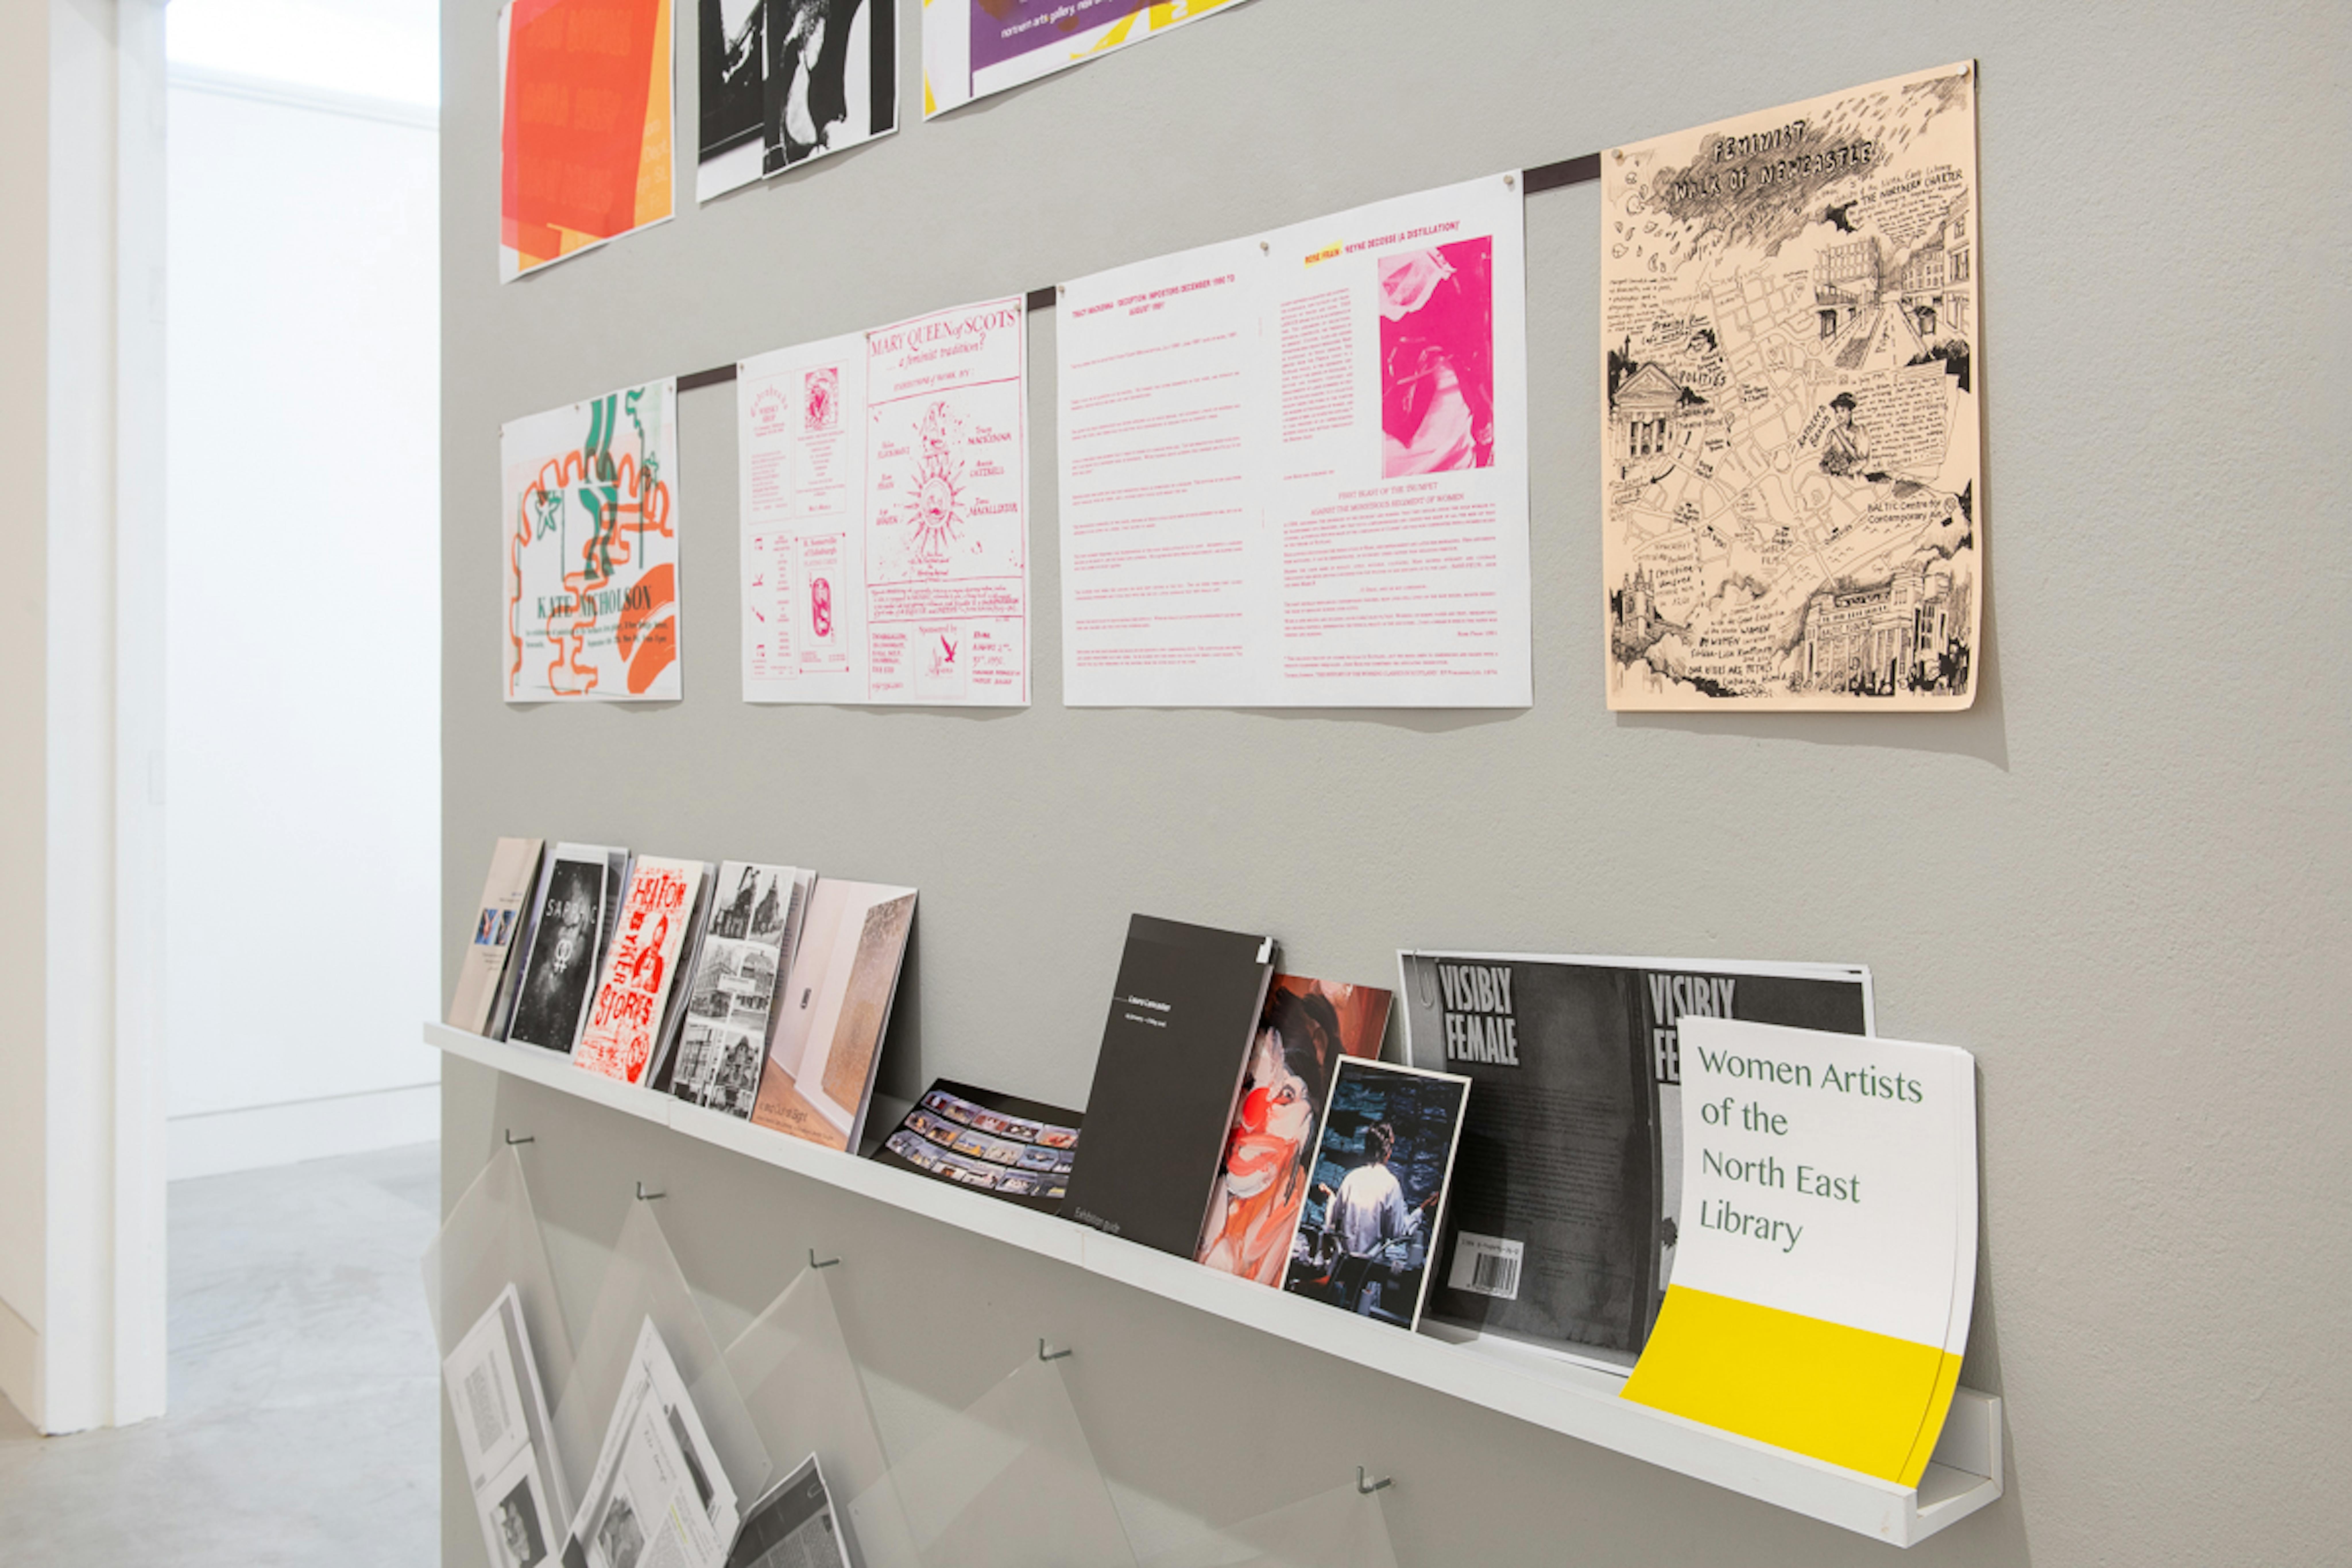 A grey wall contains posters in bright colours taken from an archive of women artists from the North East of England. The shelf contains publications and pamphlets from the archive. 